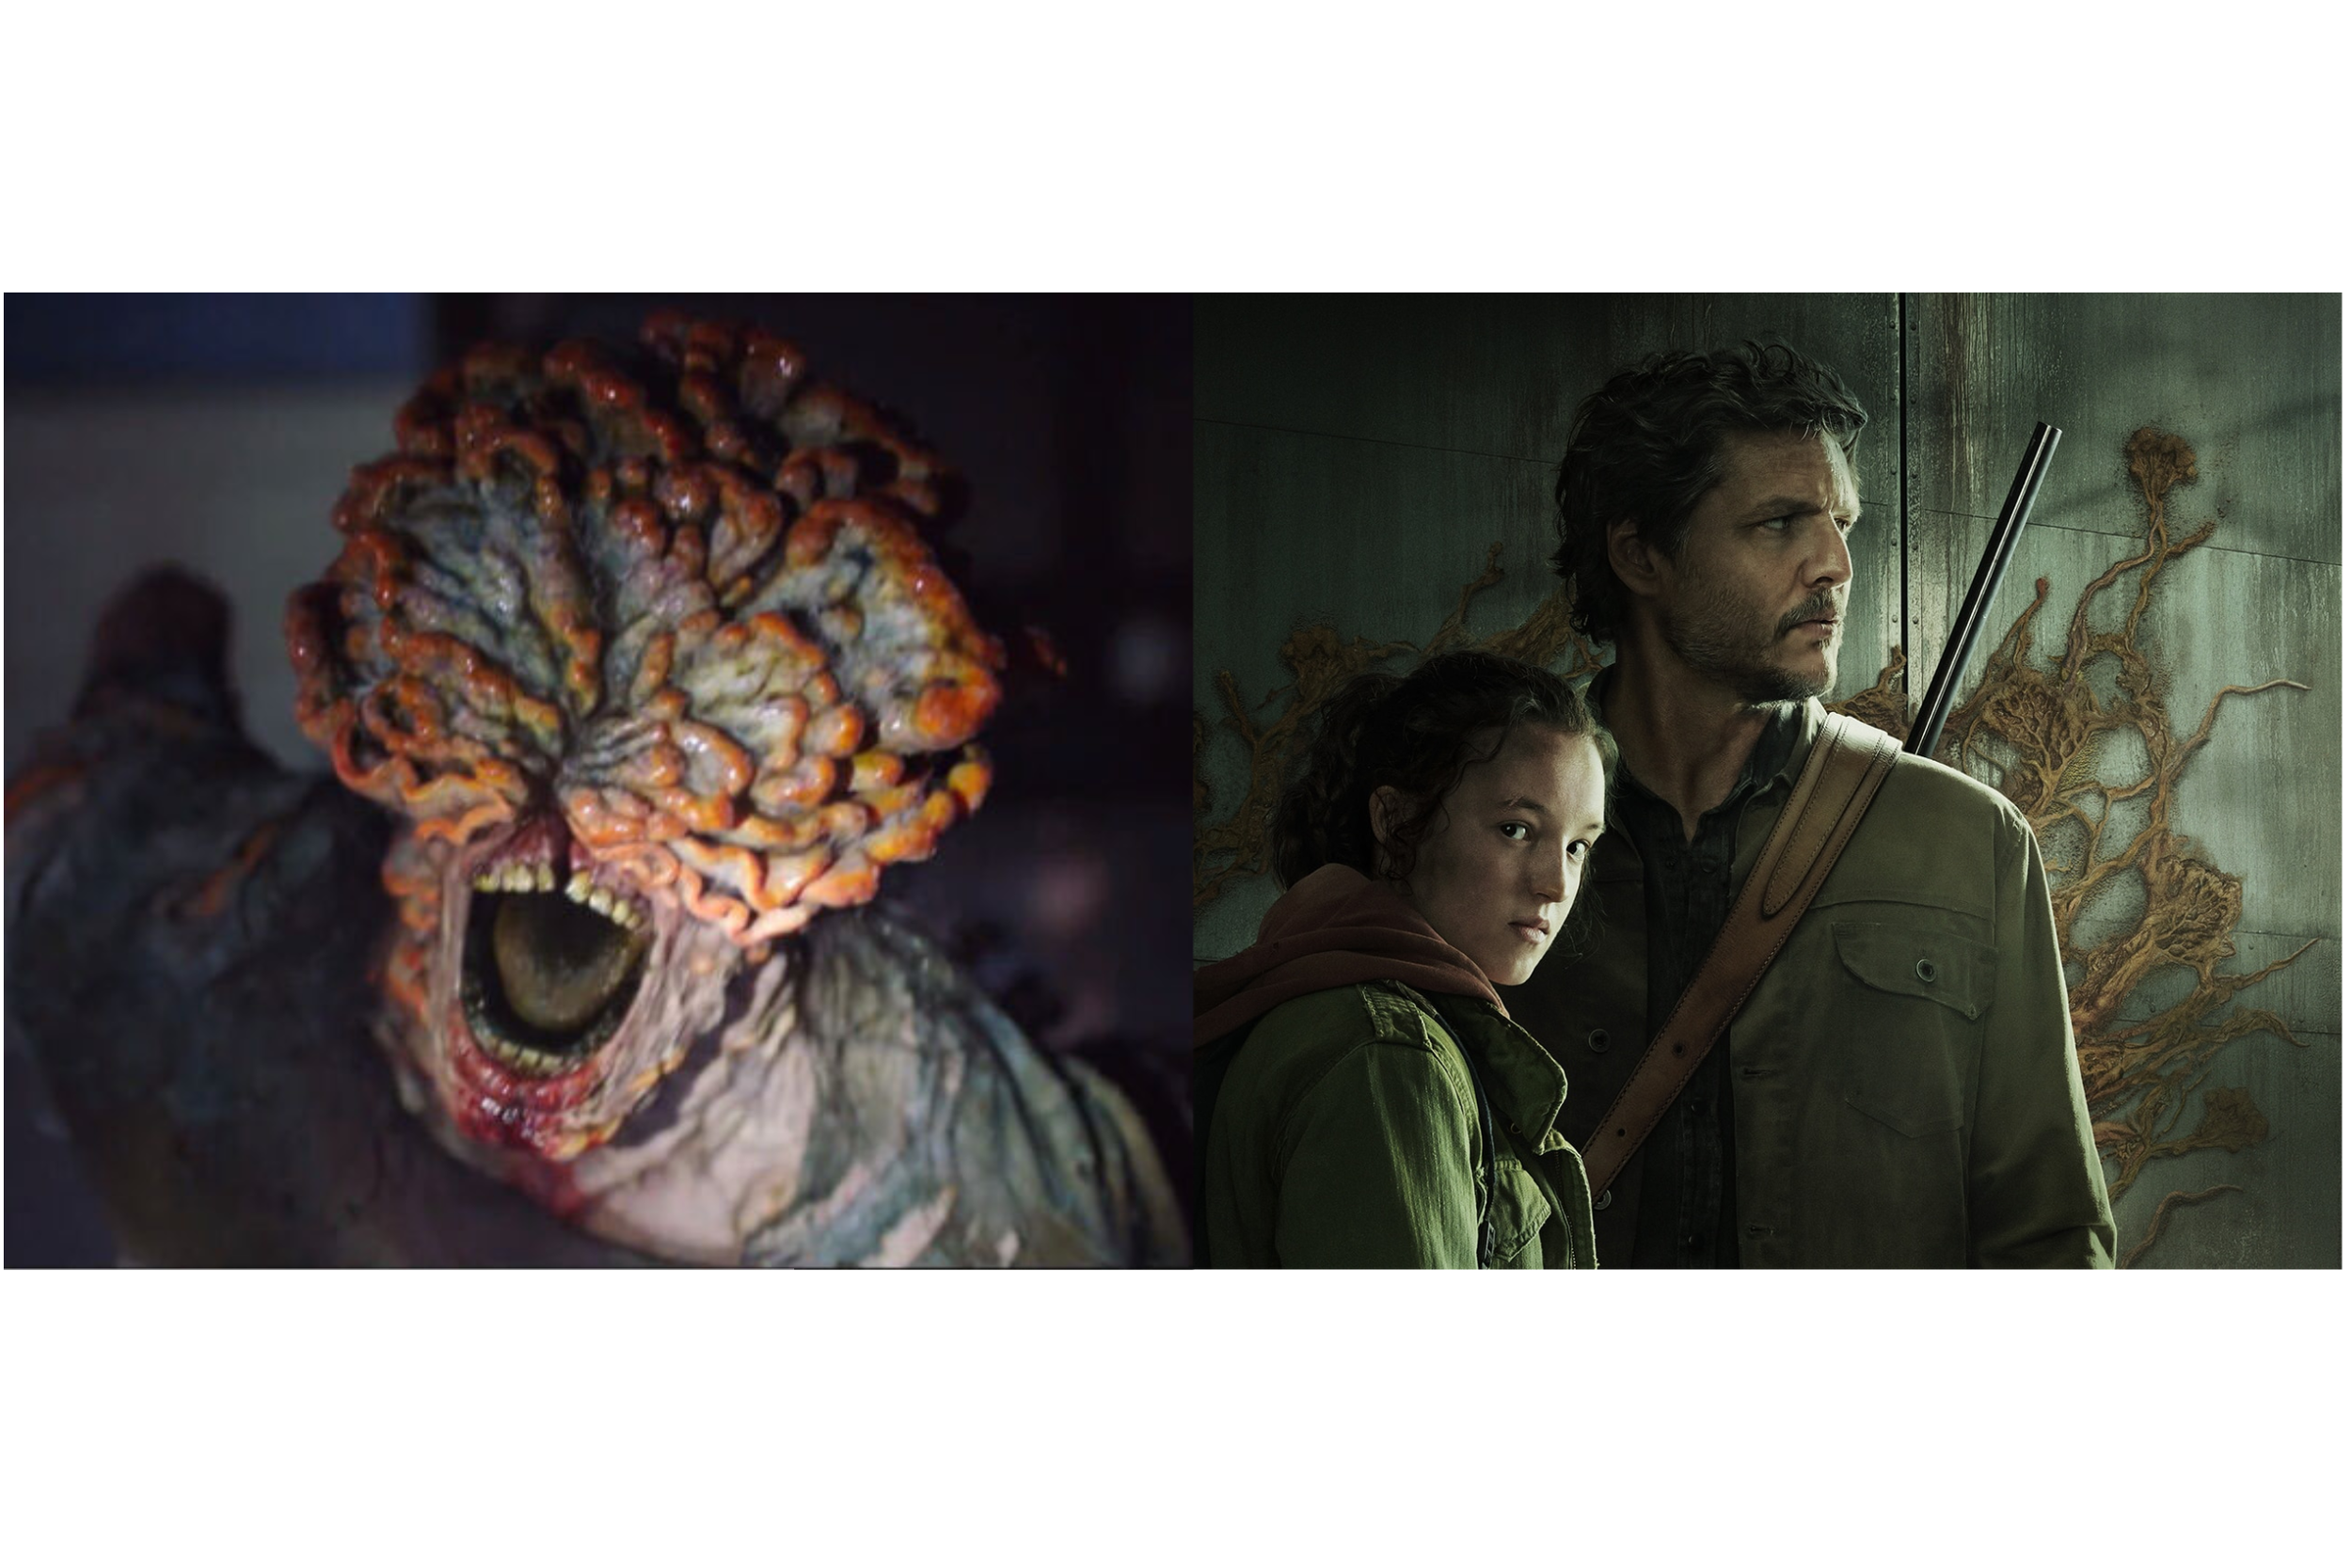 Mushroom Monsters! Creating the Fungus Zombies for The Last of Us